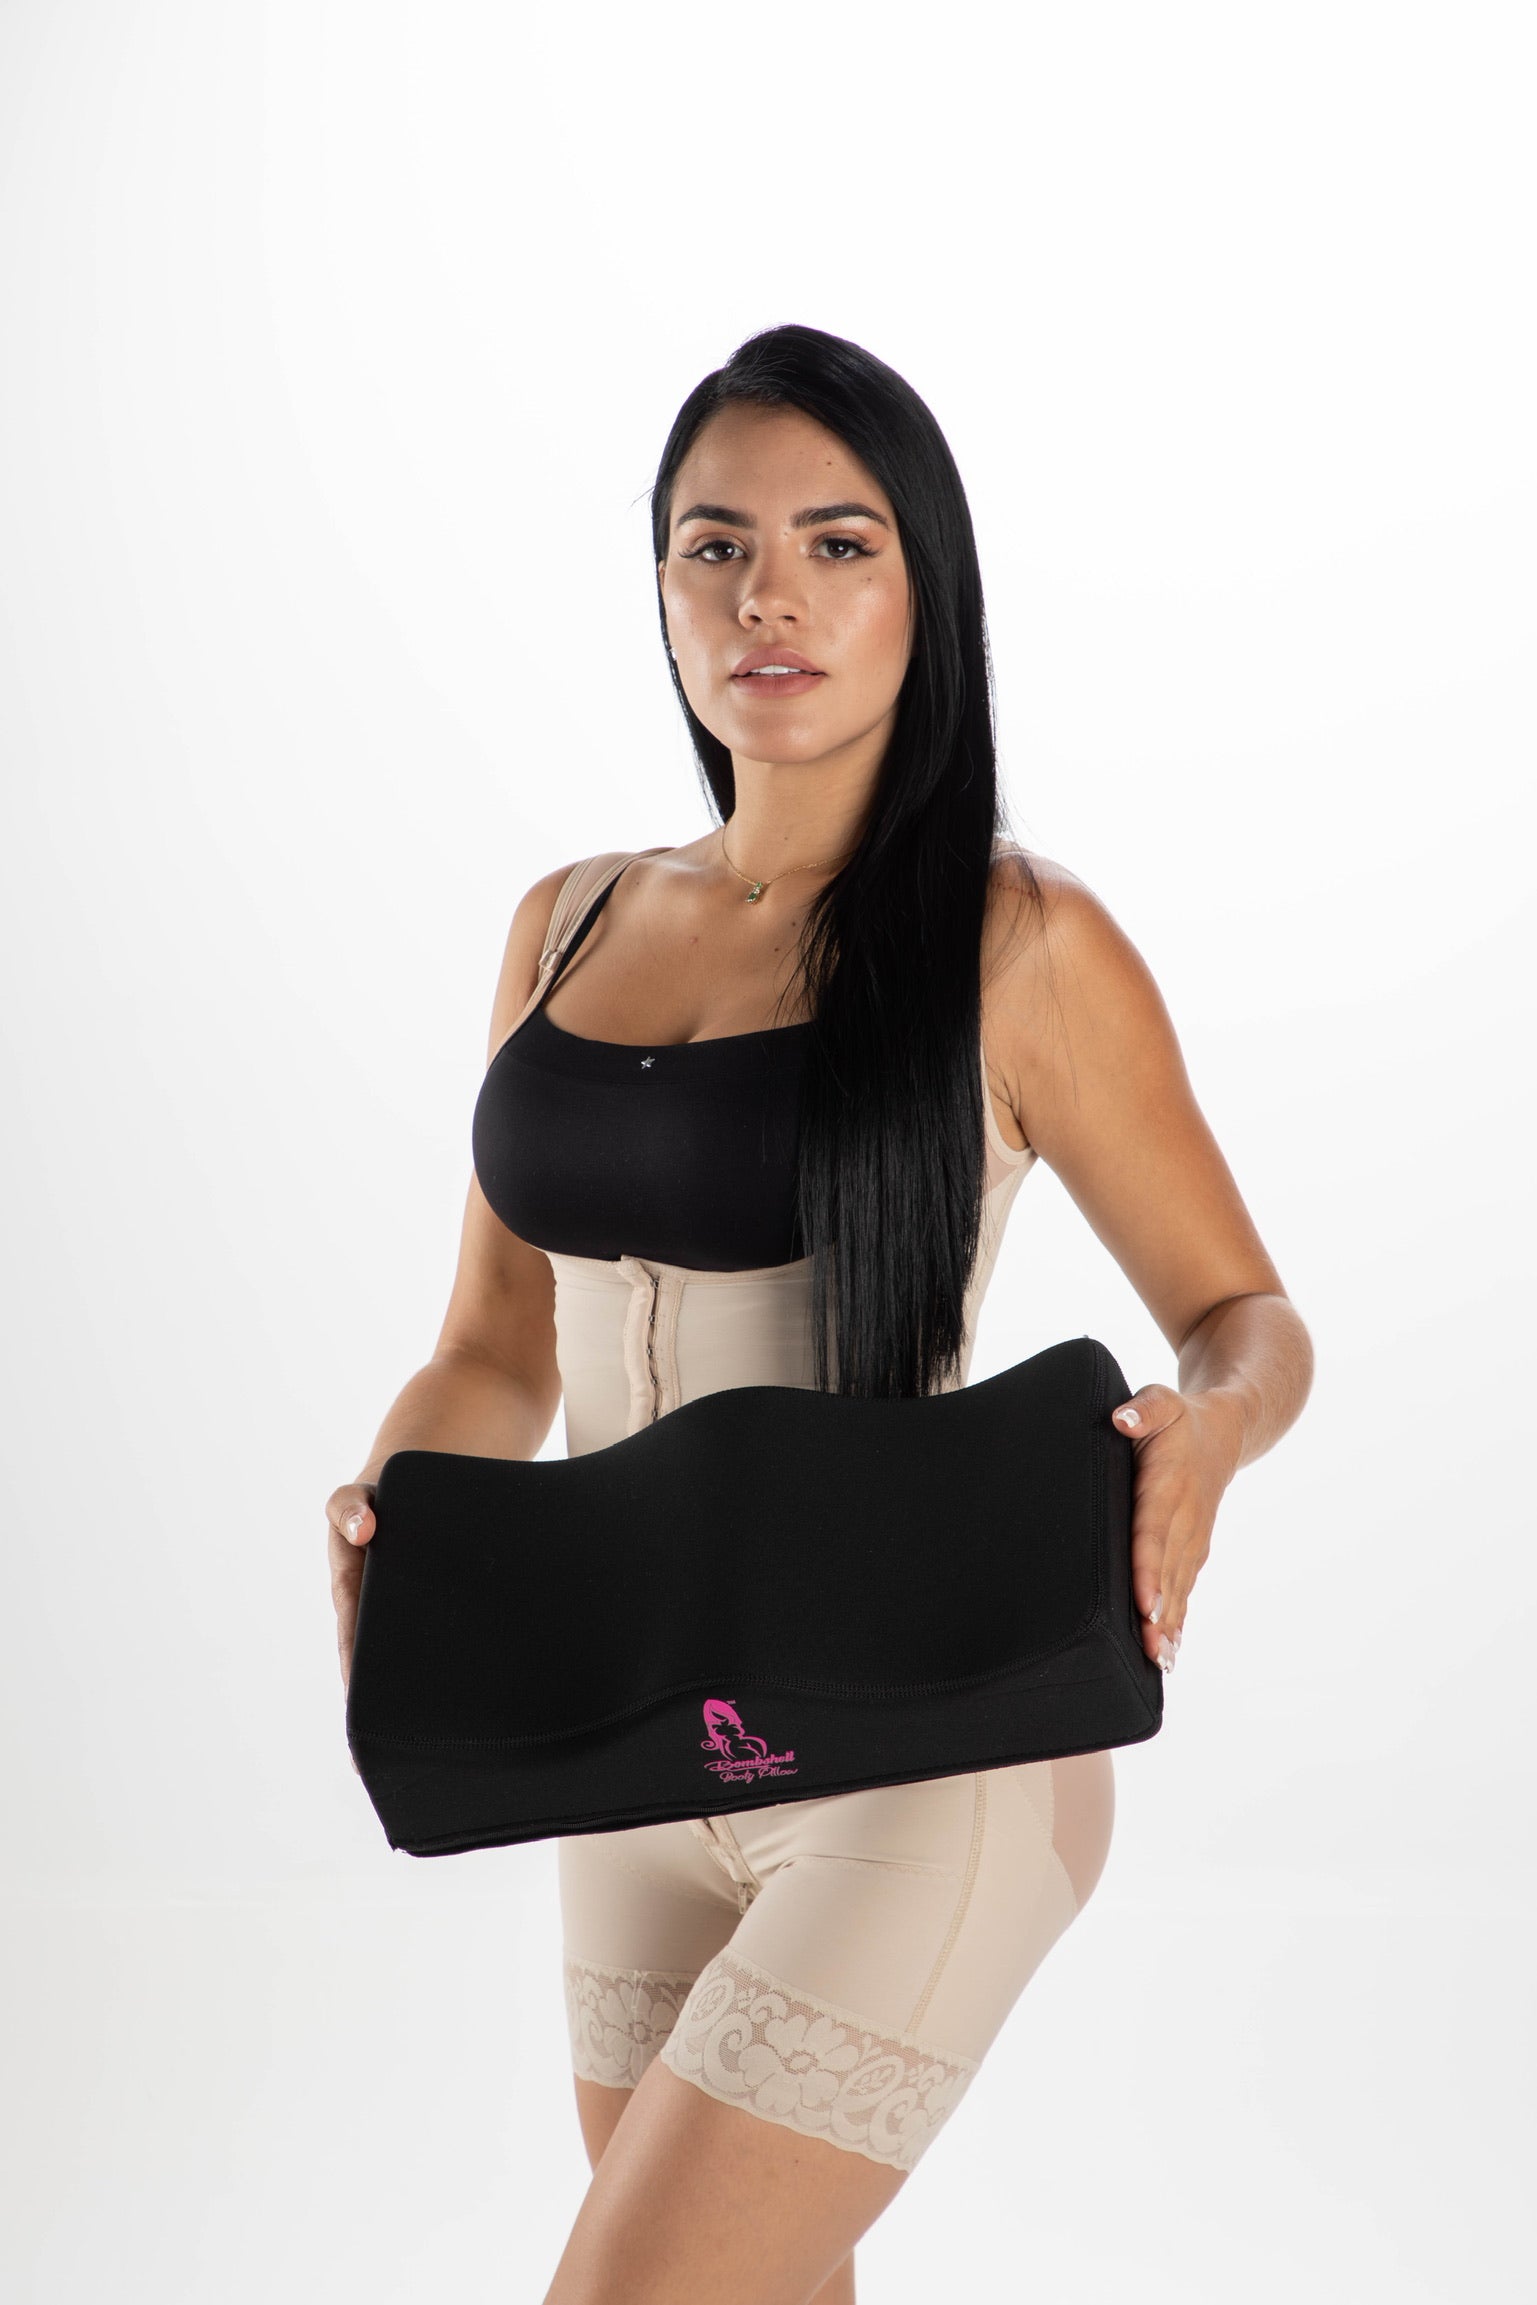 Bombshell Booty Pillow - BBL Pillow for Driving & Backrest Support Combo by Bombshell Booty Pillow